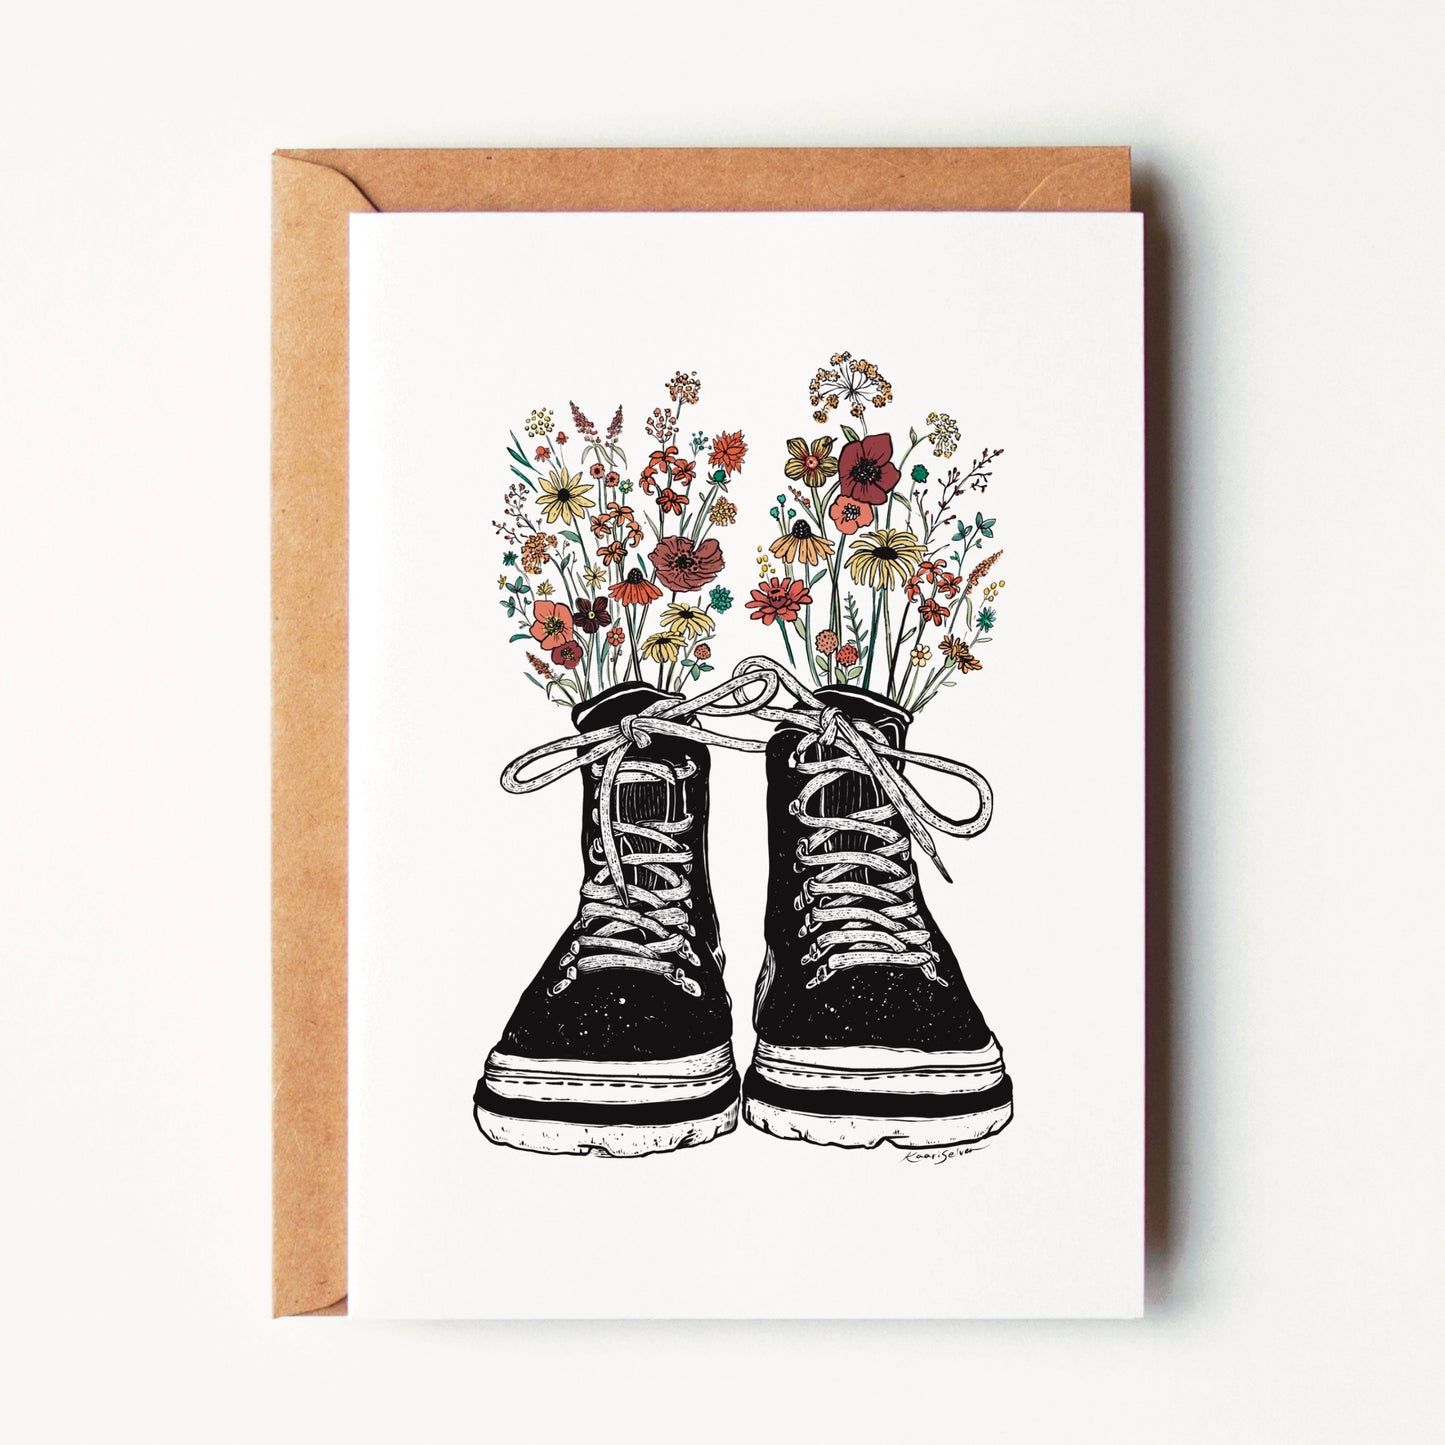 Floral Hiking Boots Greeting Card